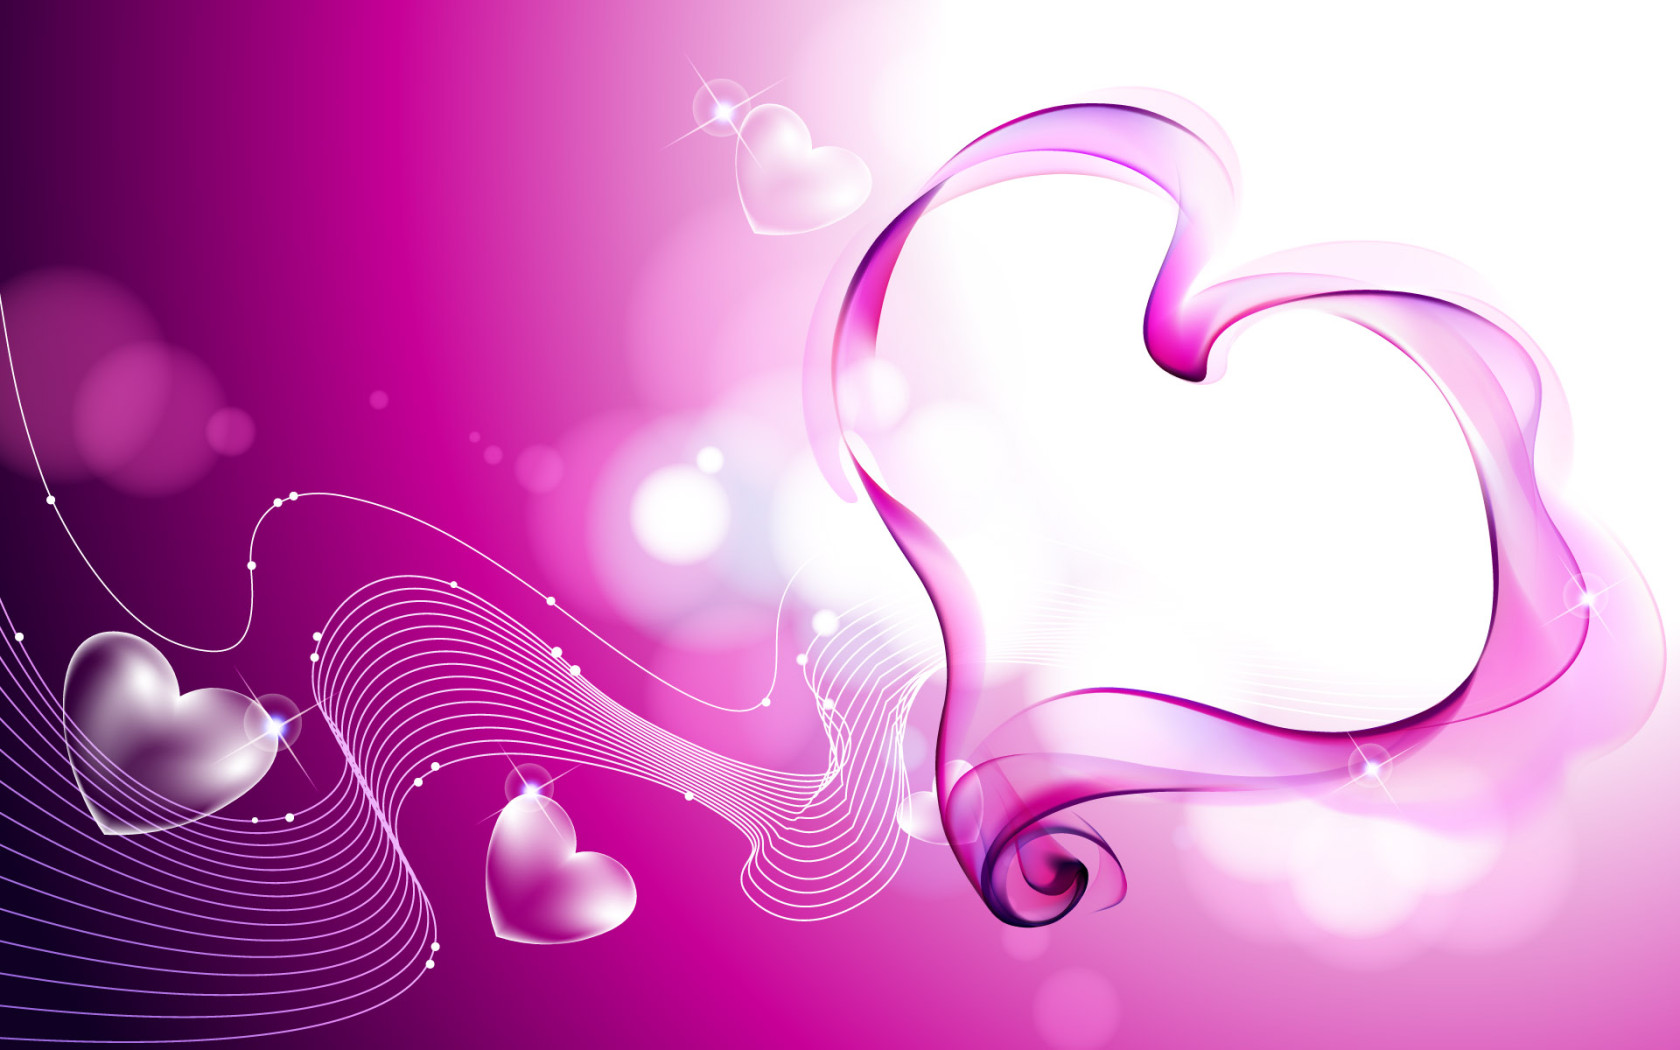 Valentines Beautiful Saint Pictures Holidays Hearts Wallpaper For